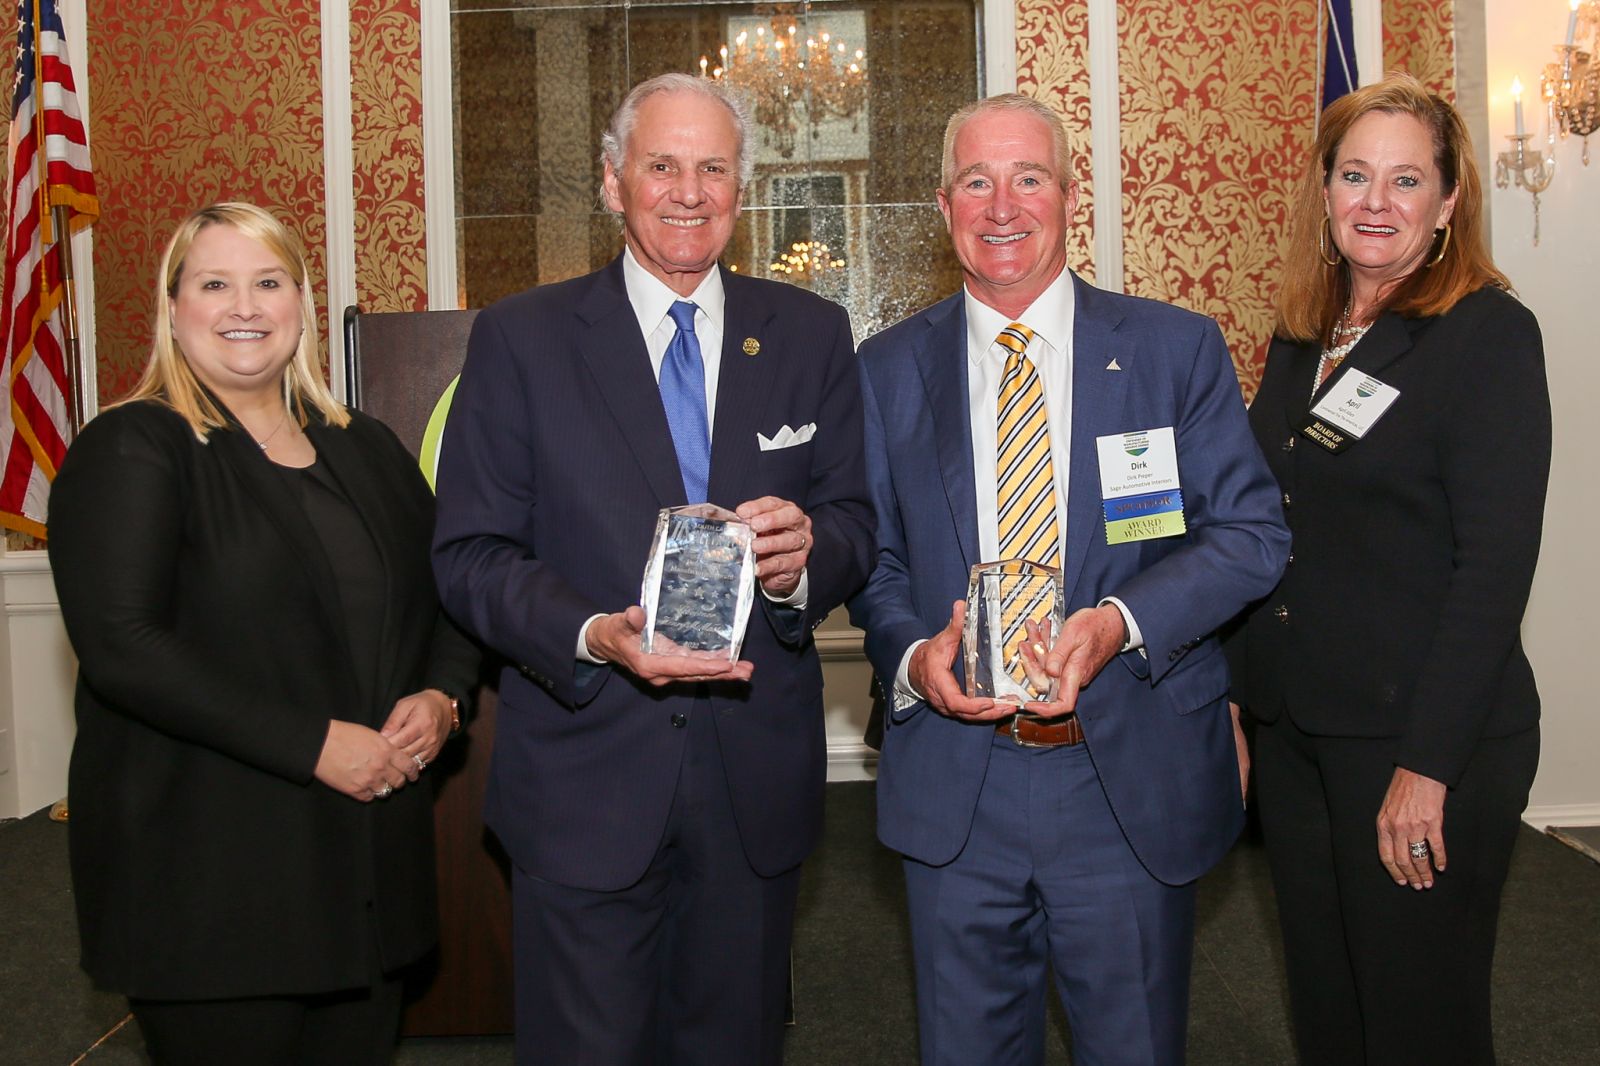  (Left to Right) Sara Hazzard, president and CEO of the South Carolina Manufacturers Alliance and April Allen, chair of the South Carolina Manufacturers Alliance and director of U.S. Government Relations with Continental (left to right) award Gov. Henry McMaster and Dirk Pieper, president and CEO of Sage Automotive Interiors. (Photo/Devin Steele) 